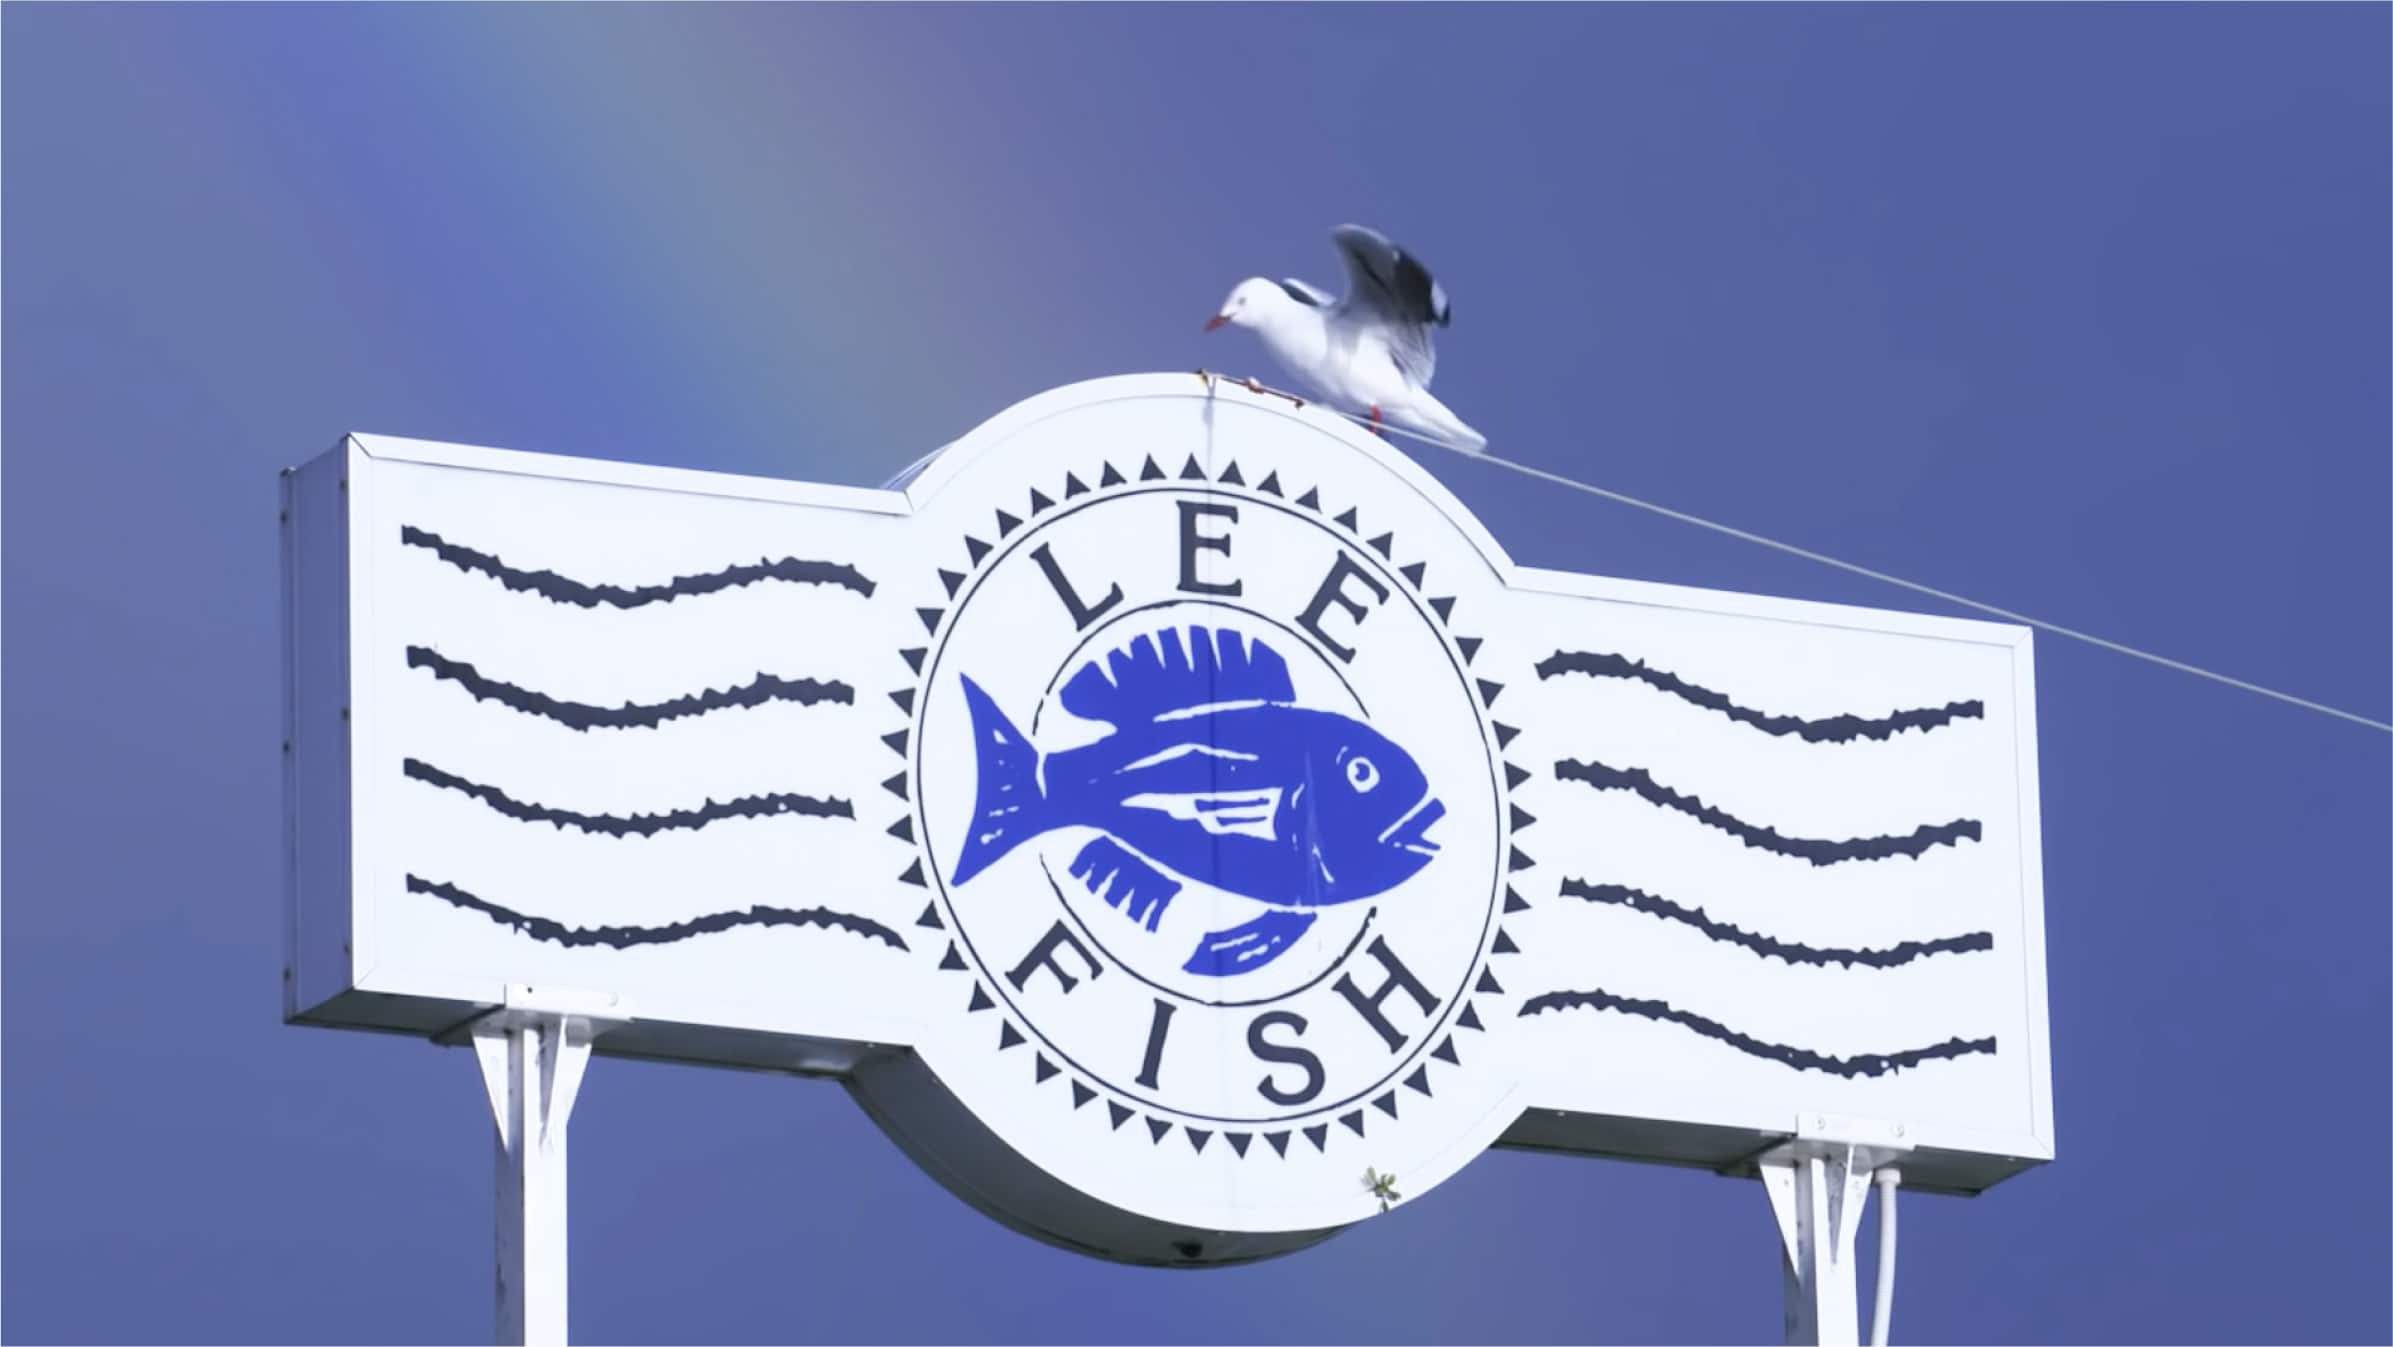 A Lee Fish company sign against a blue sky, with a seagull sitting on top.